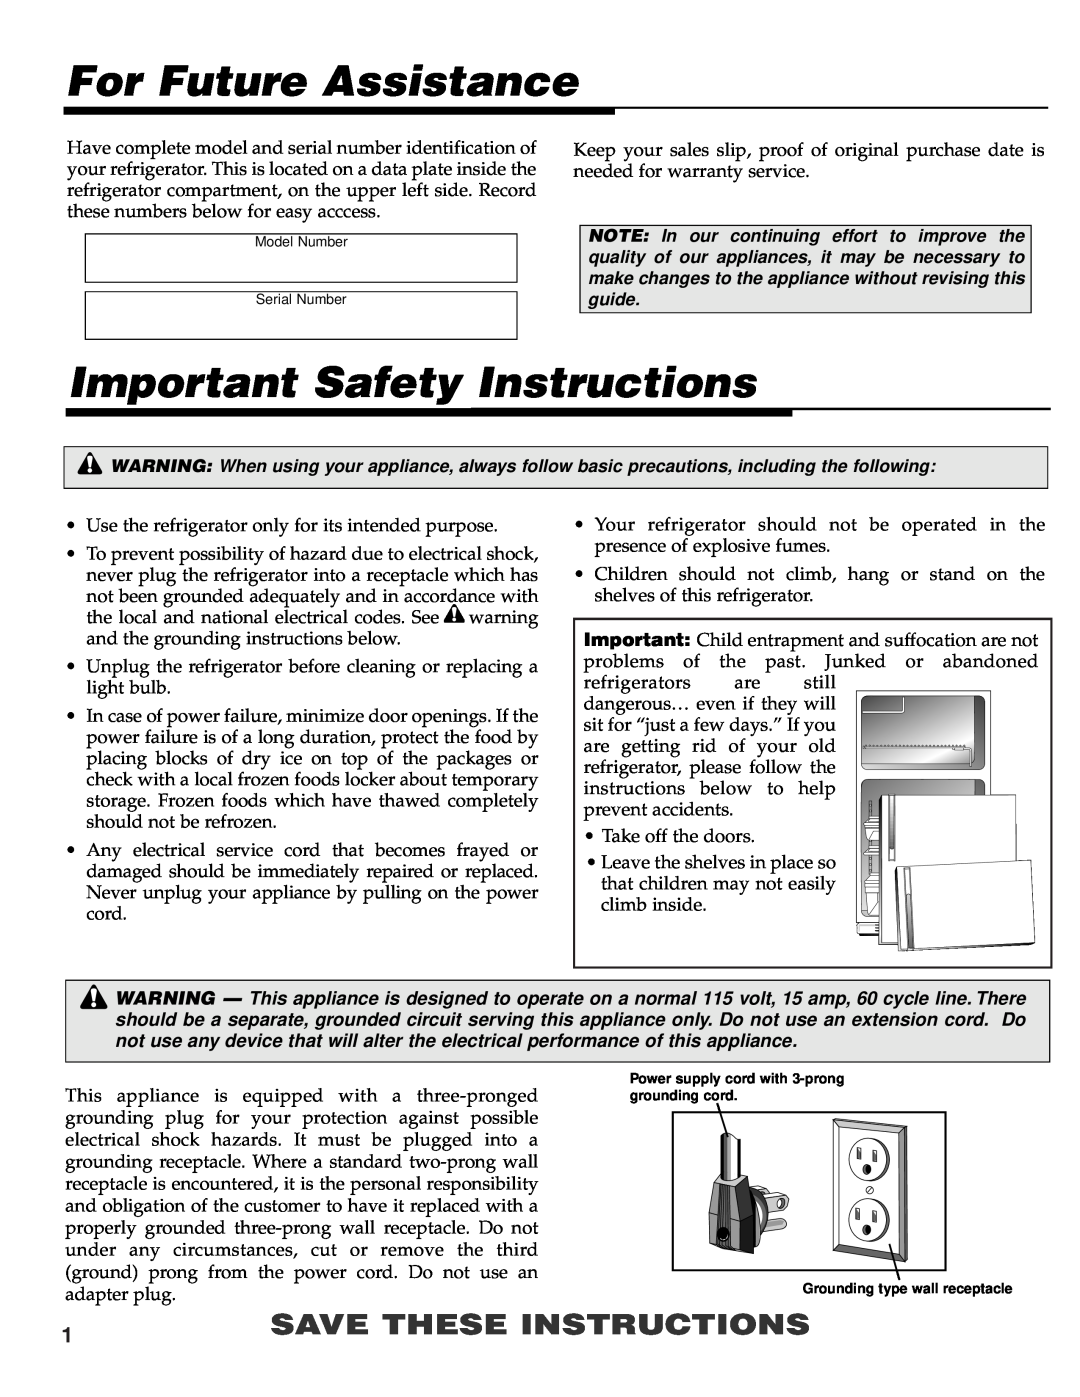 Maytag 61005299 warranty For Future Assistance, Important Safety Instructions, Save These Instructions 